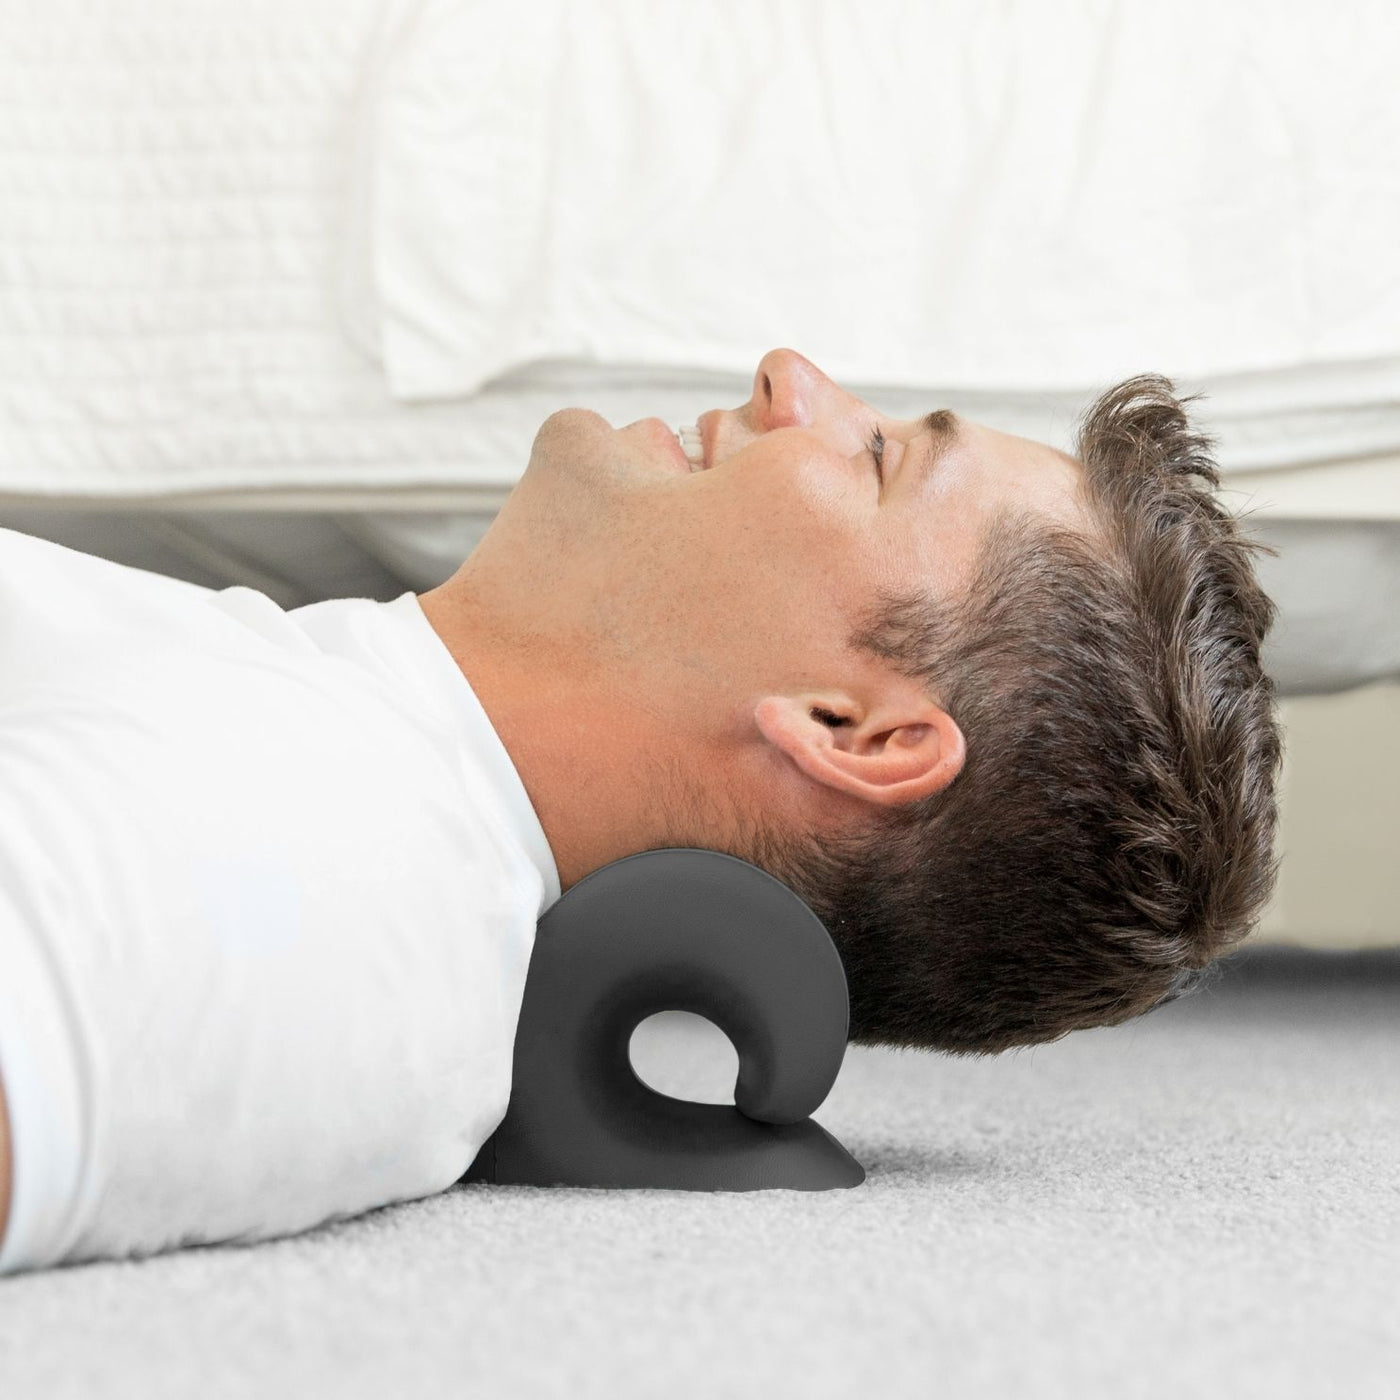 Our stretching pillow helps provide soothing comfort for your stiff or sore neck